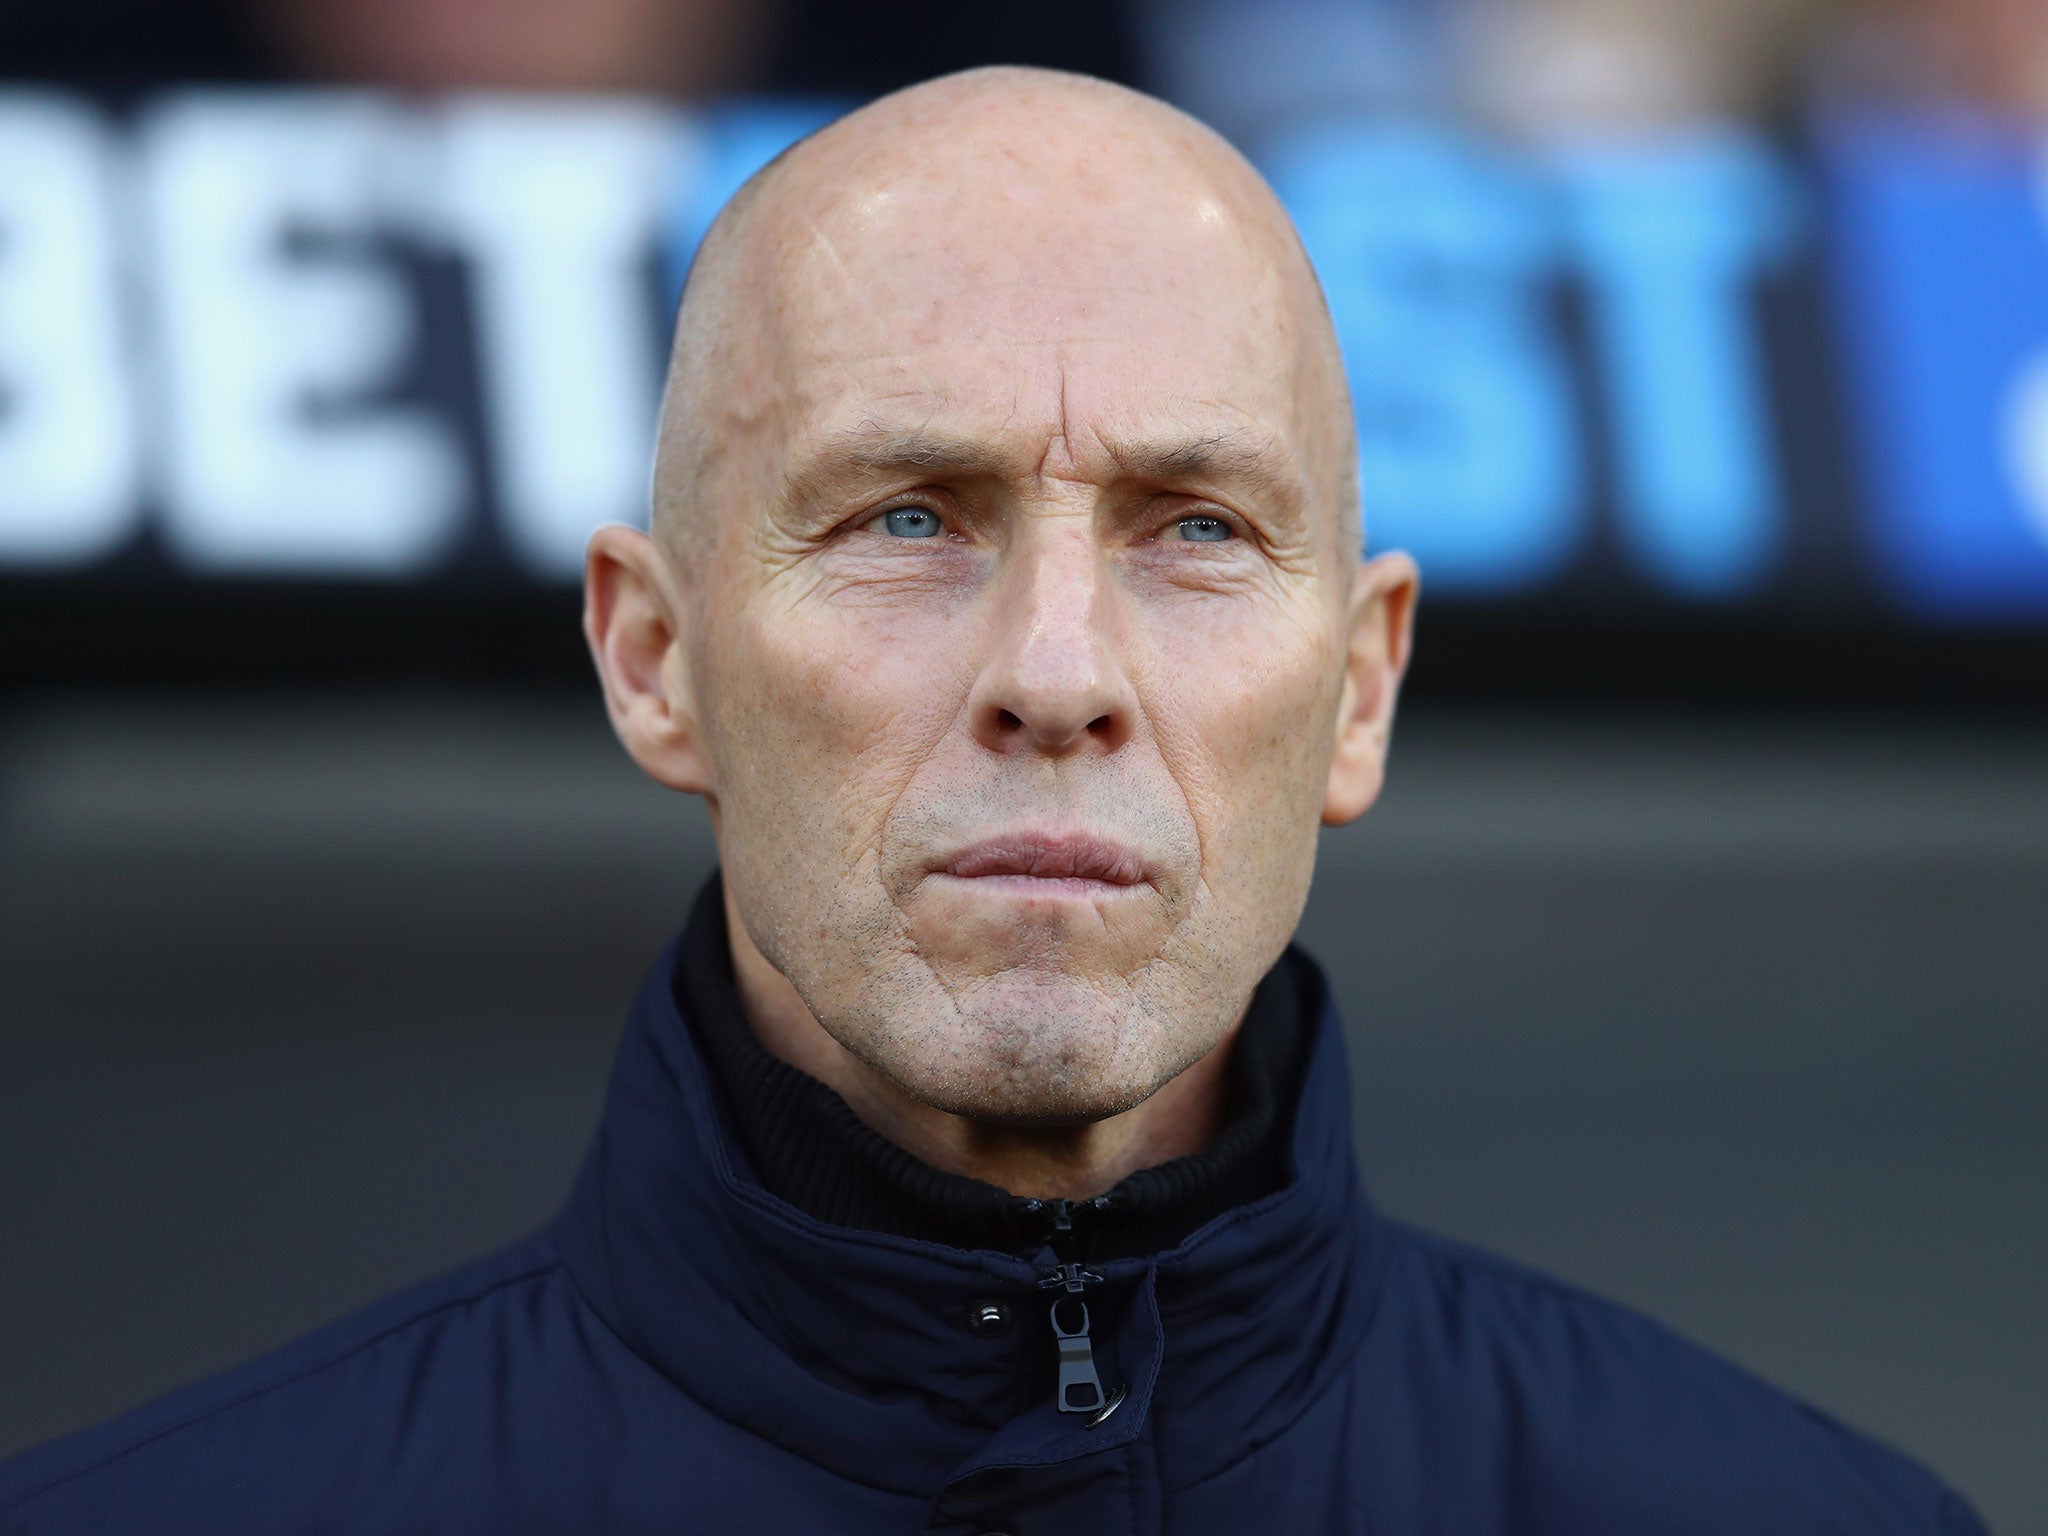 &#13;
Bob Bradley's spell in charge was short-lived and disastrous &#13;